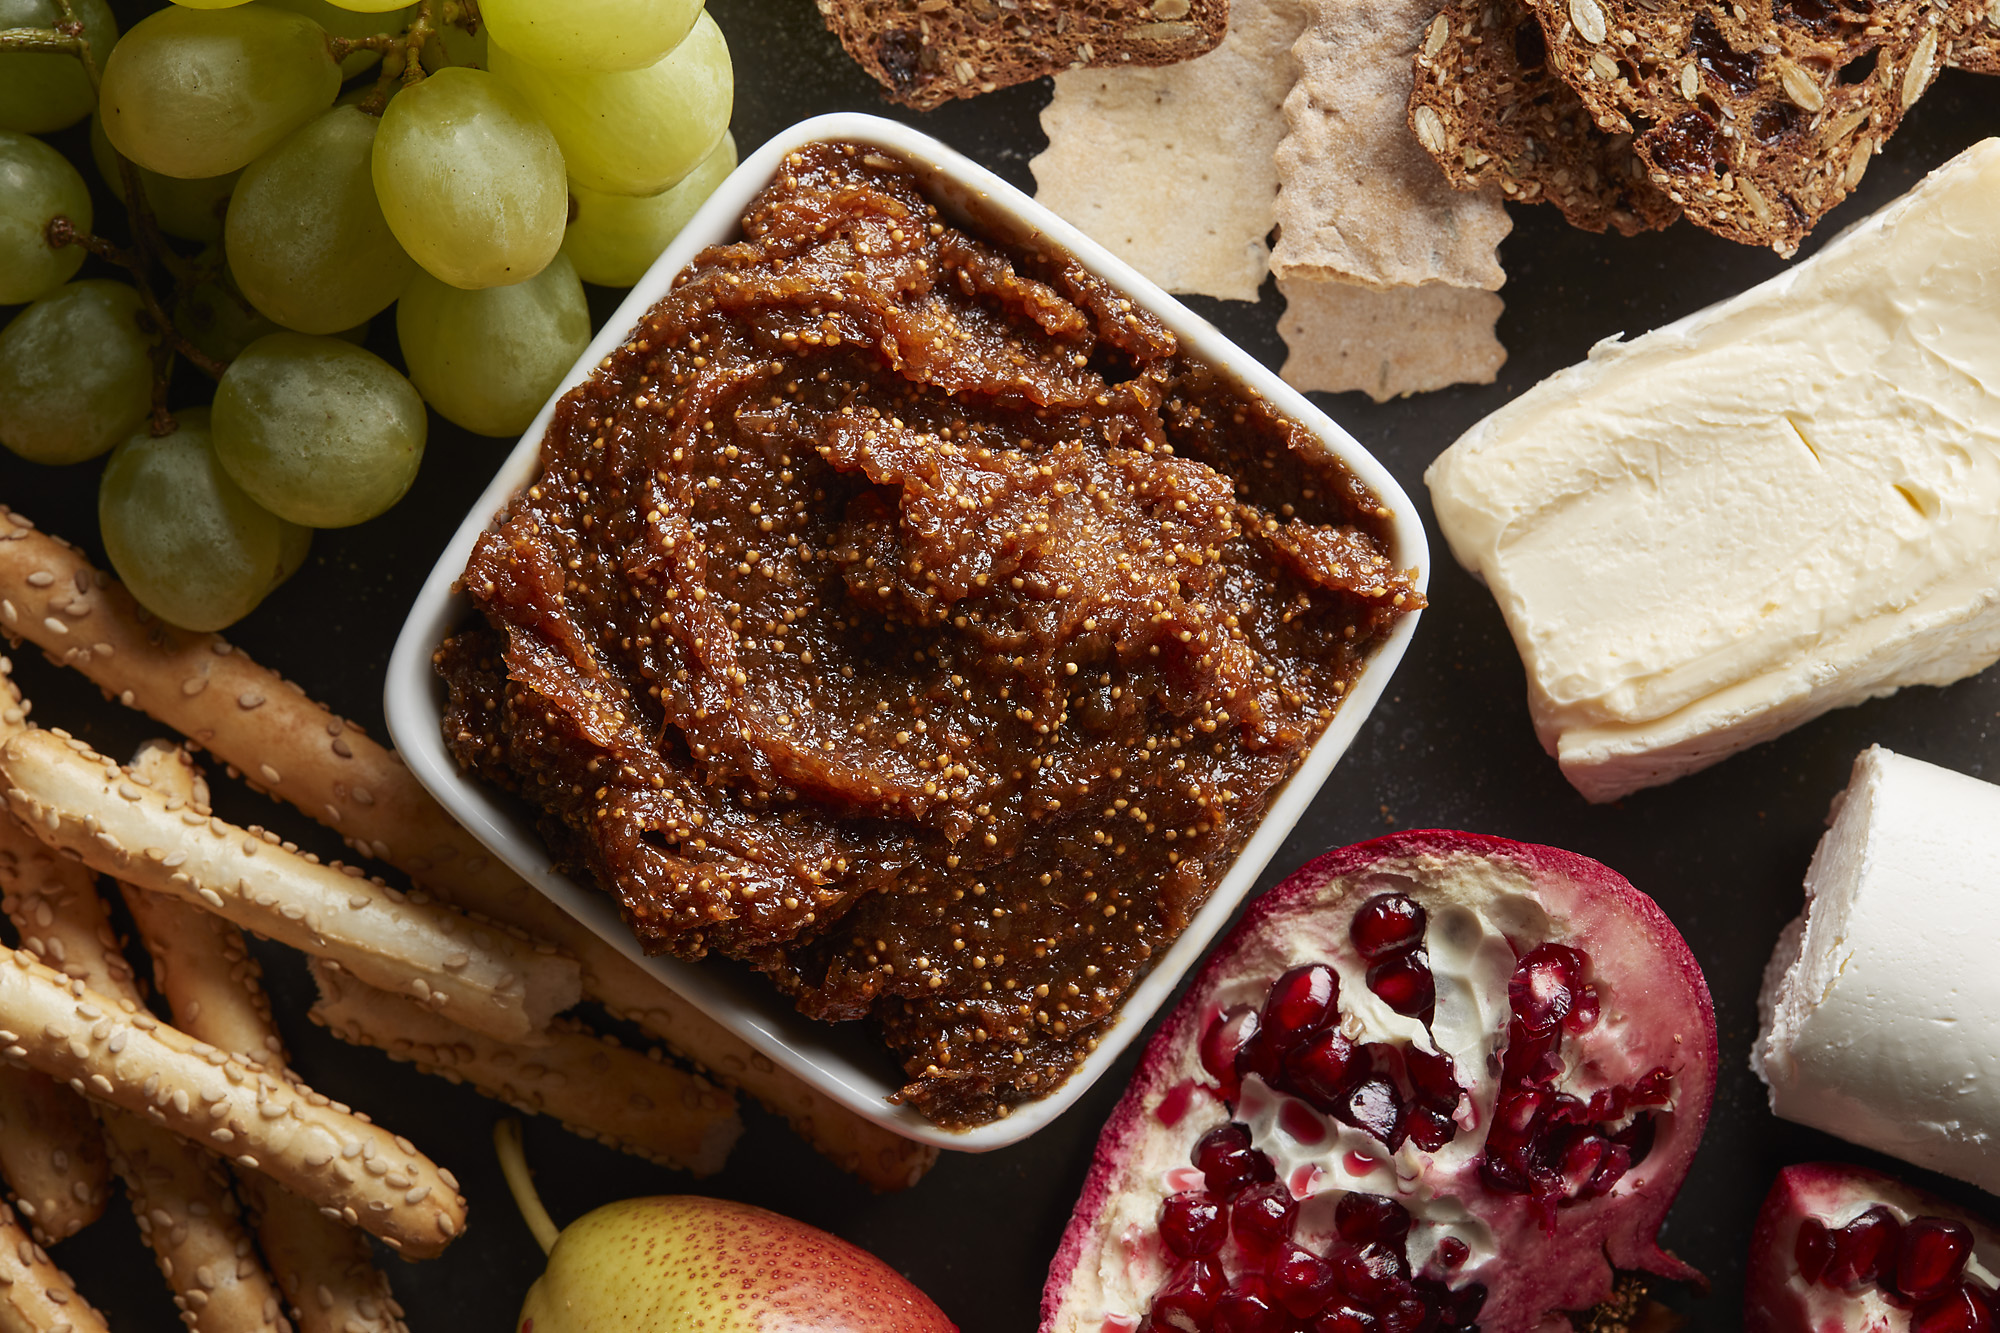 A small bowl of spiced fig jam surrounded by other ingredients